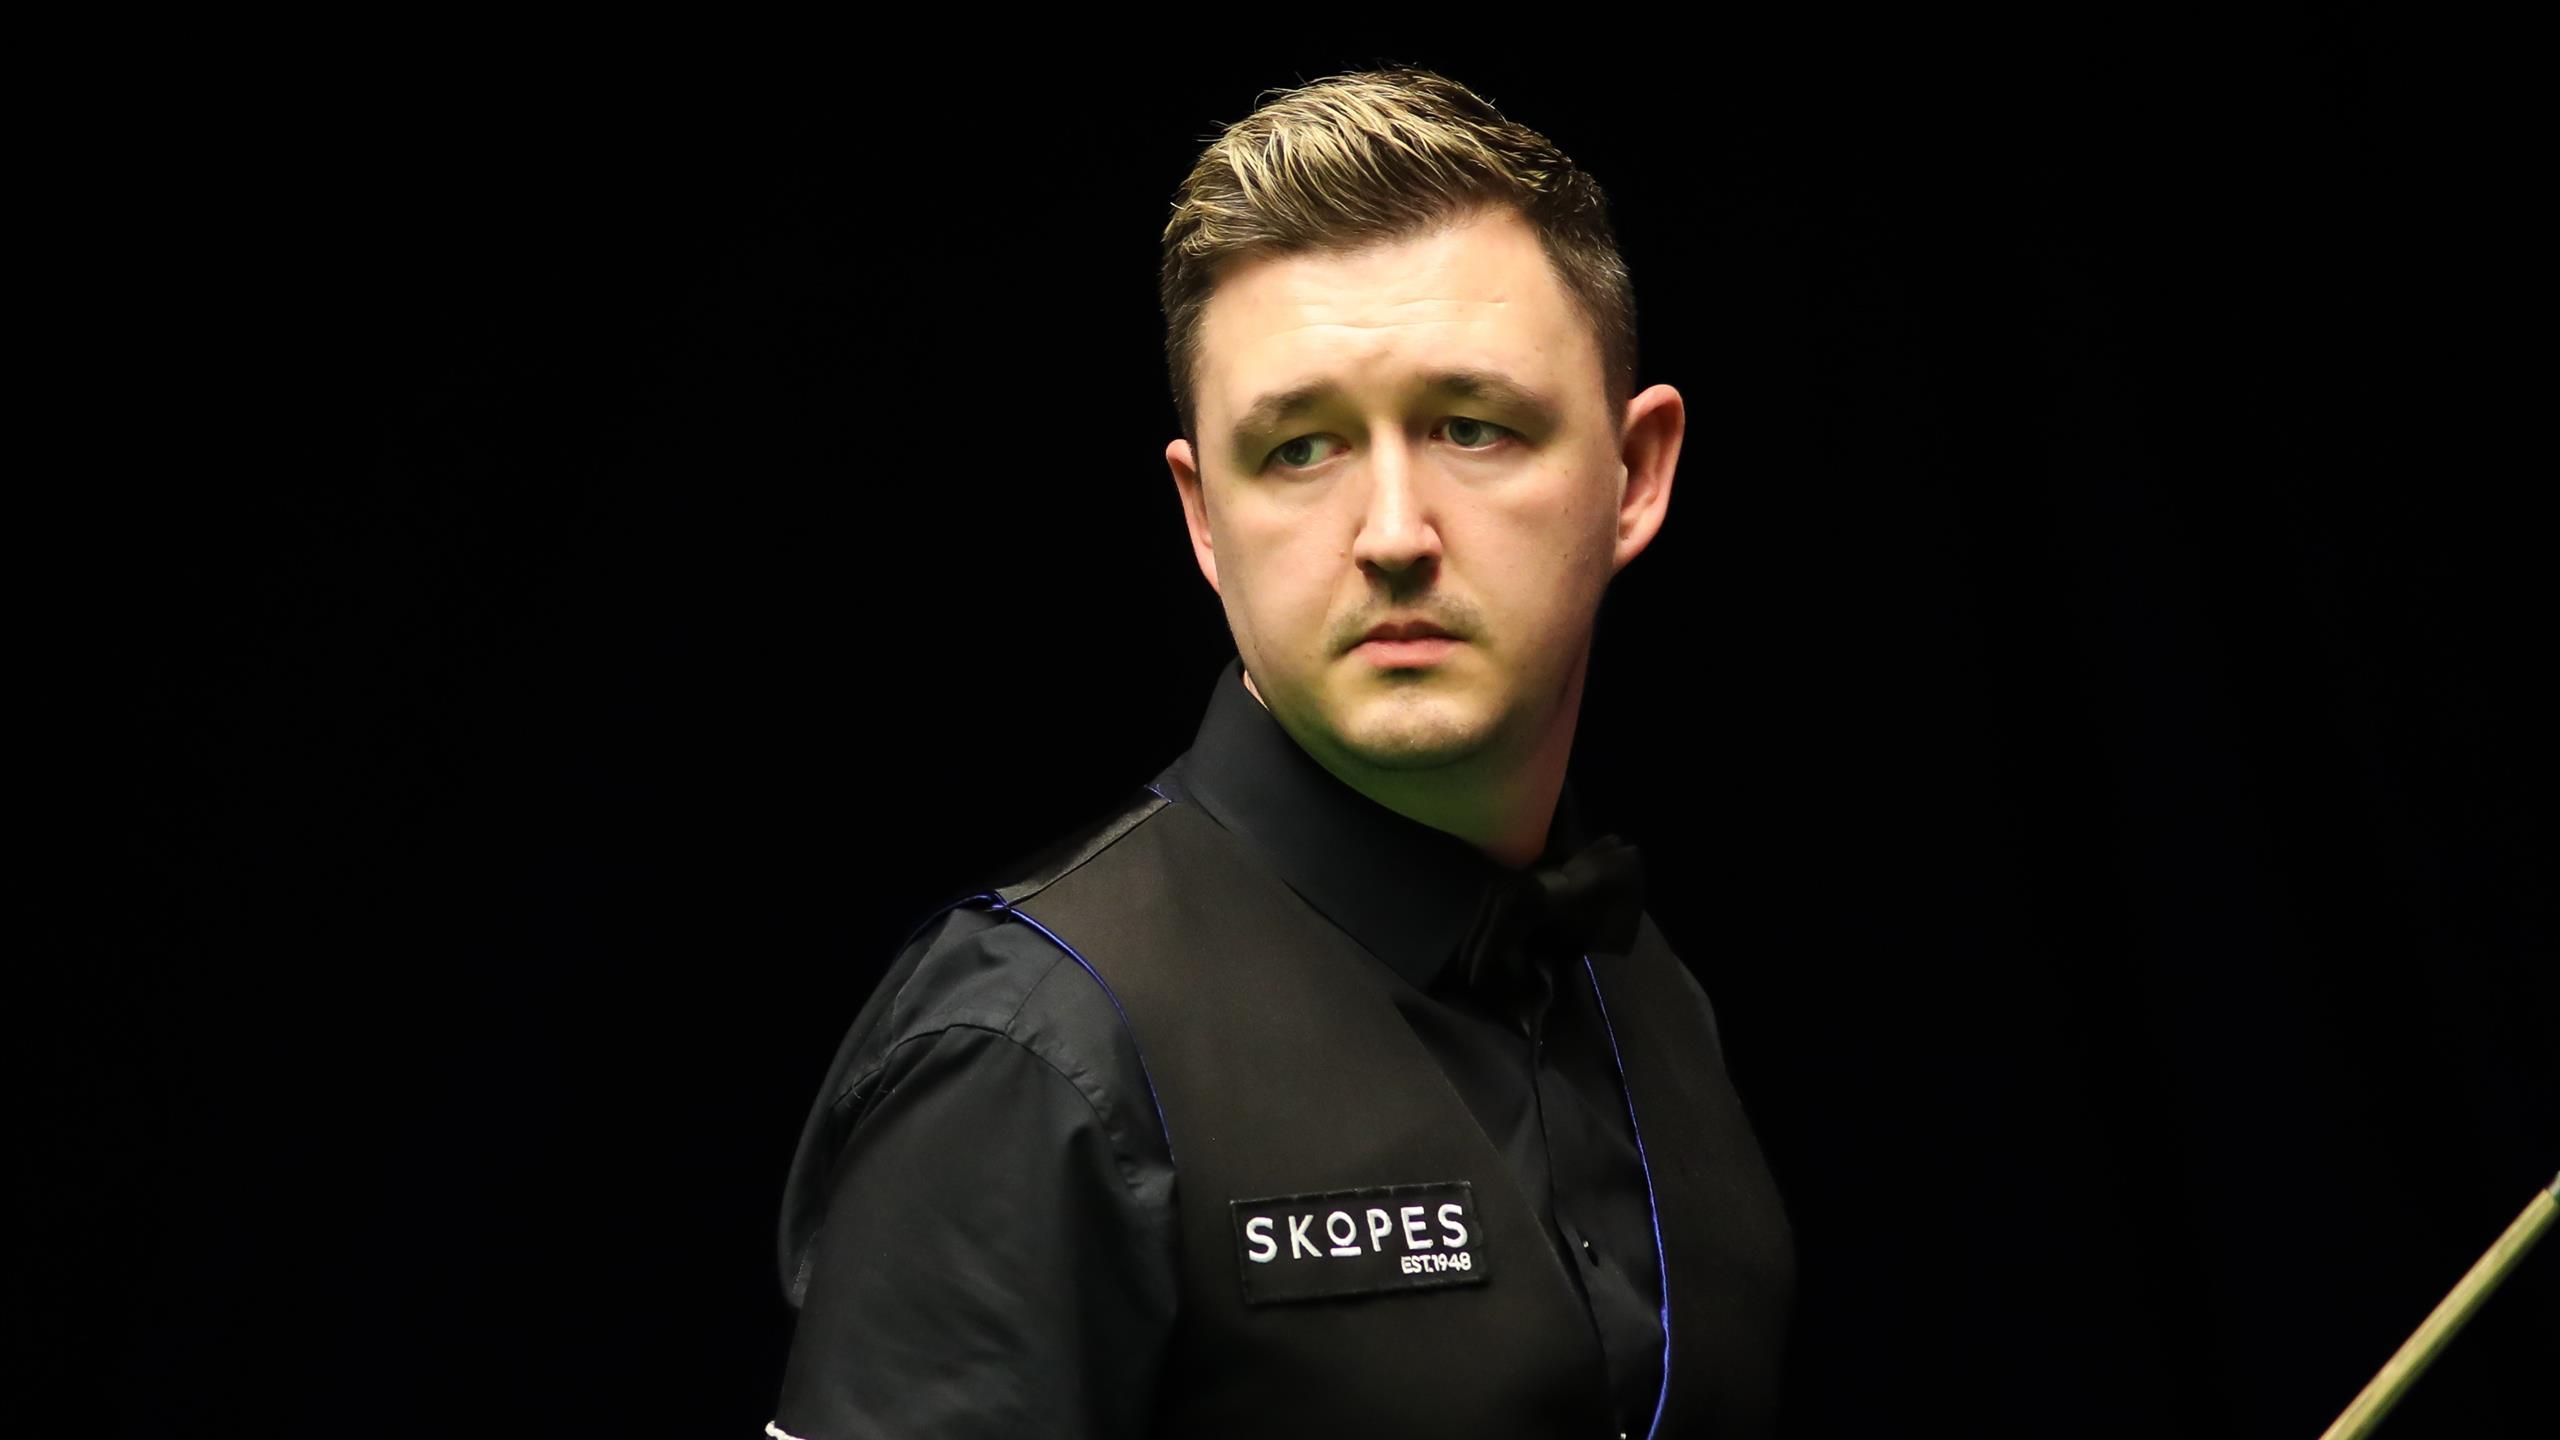 Kyren Wilson feeling better after opening up about sons illness - Its important to talk